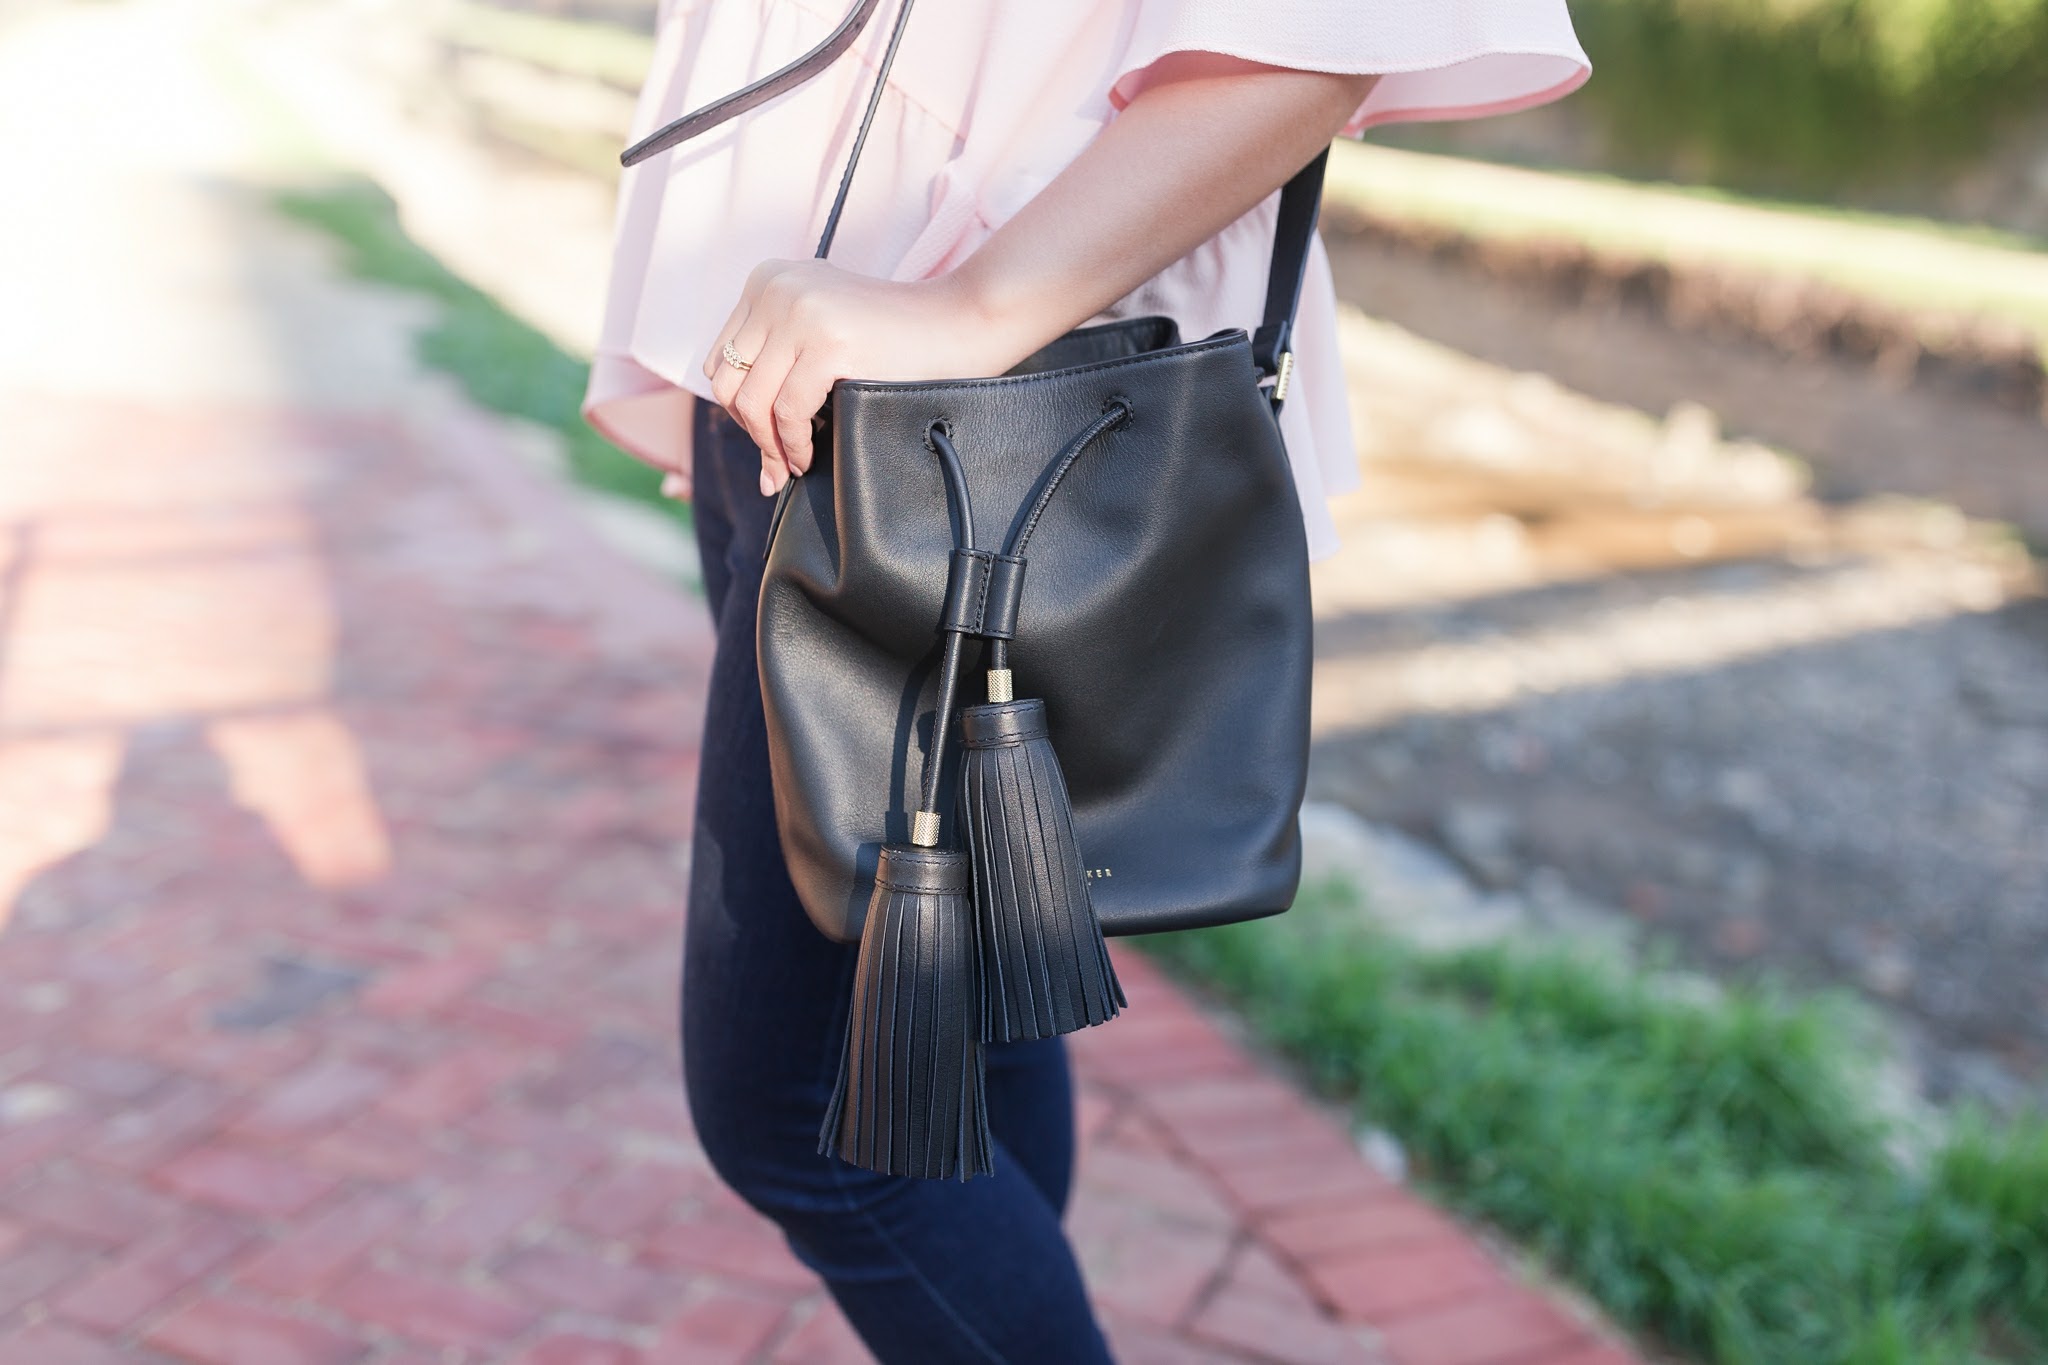 Spring Favorites - Pink Ruffles + The Ted Baker Bucket Bag - Stylista Esquire - @Stylistaesquire